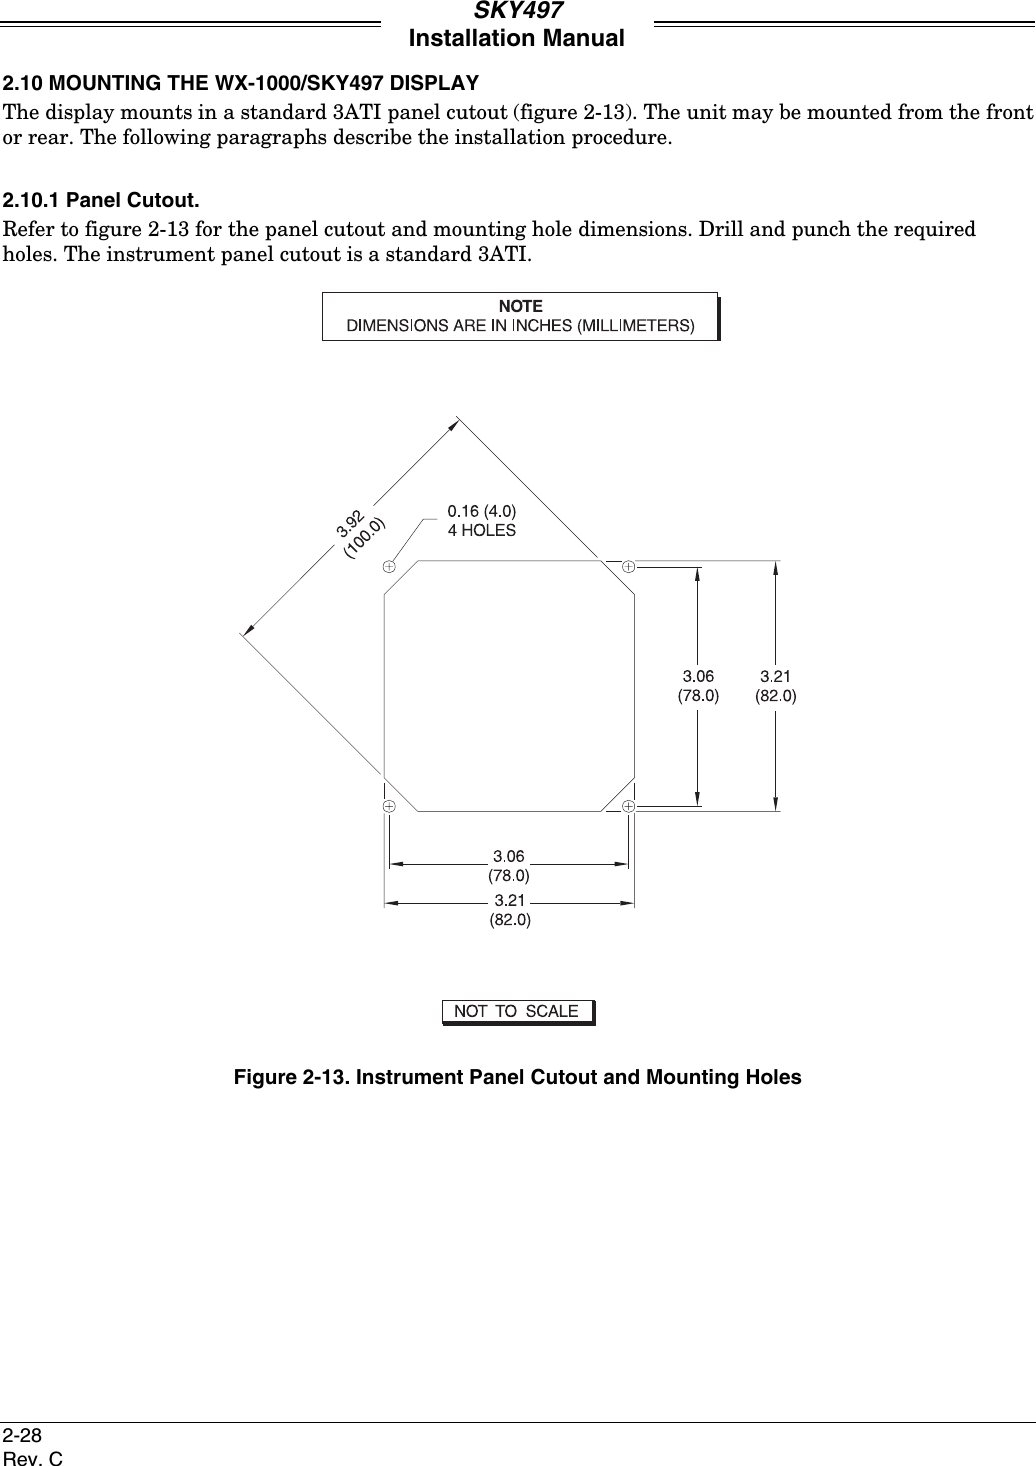 SKY497Installation Manual2-28Rev. C2.10 MOUNTING THE WX-1000/SKY497 DISPLAYThe display mounts in a standard 3ATI panel cutout (figure 2-13). The unit may be mounted from the frontor rear. The following paragraphs describe the installation procedure.2.10.1 Panel Cutout.Refer to figure 2-13 for the panel cutout and mounting hole dimensions. Drill and punch the requiredholes. The instrument panel cutout is a standard 3ATI.Figure 2-13. Instrument Panel Cutout and Mounting Holes